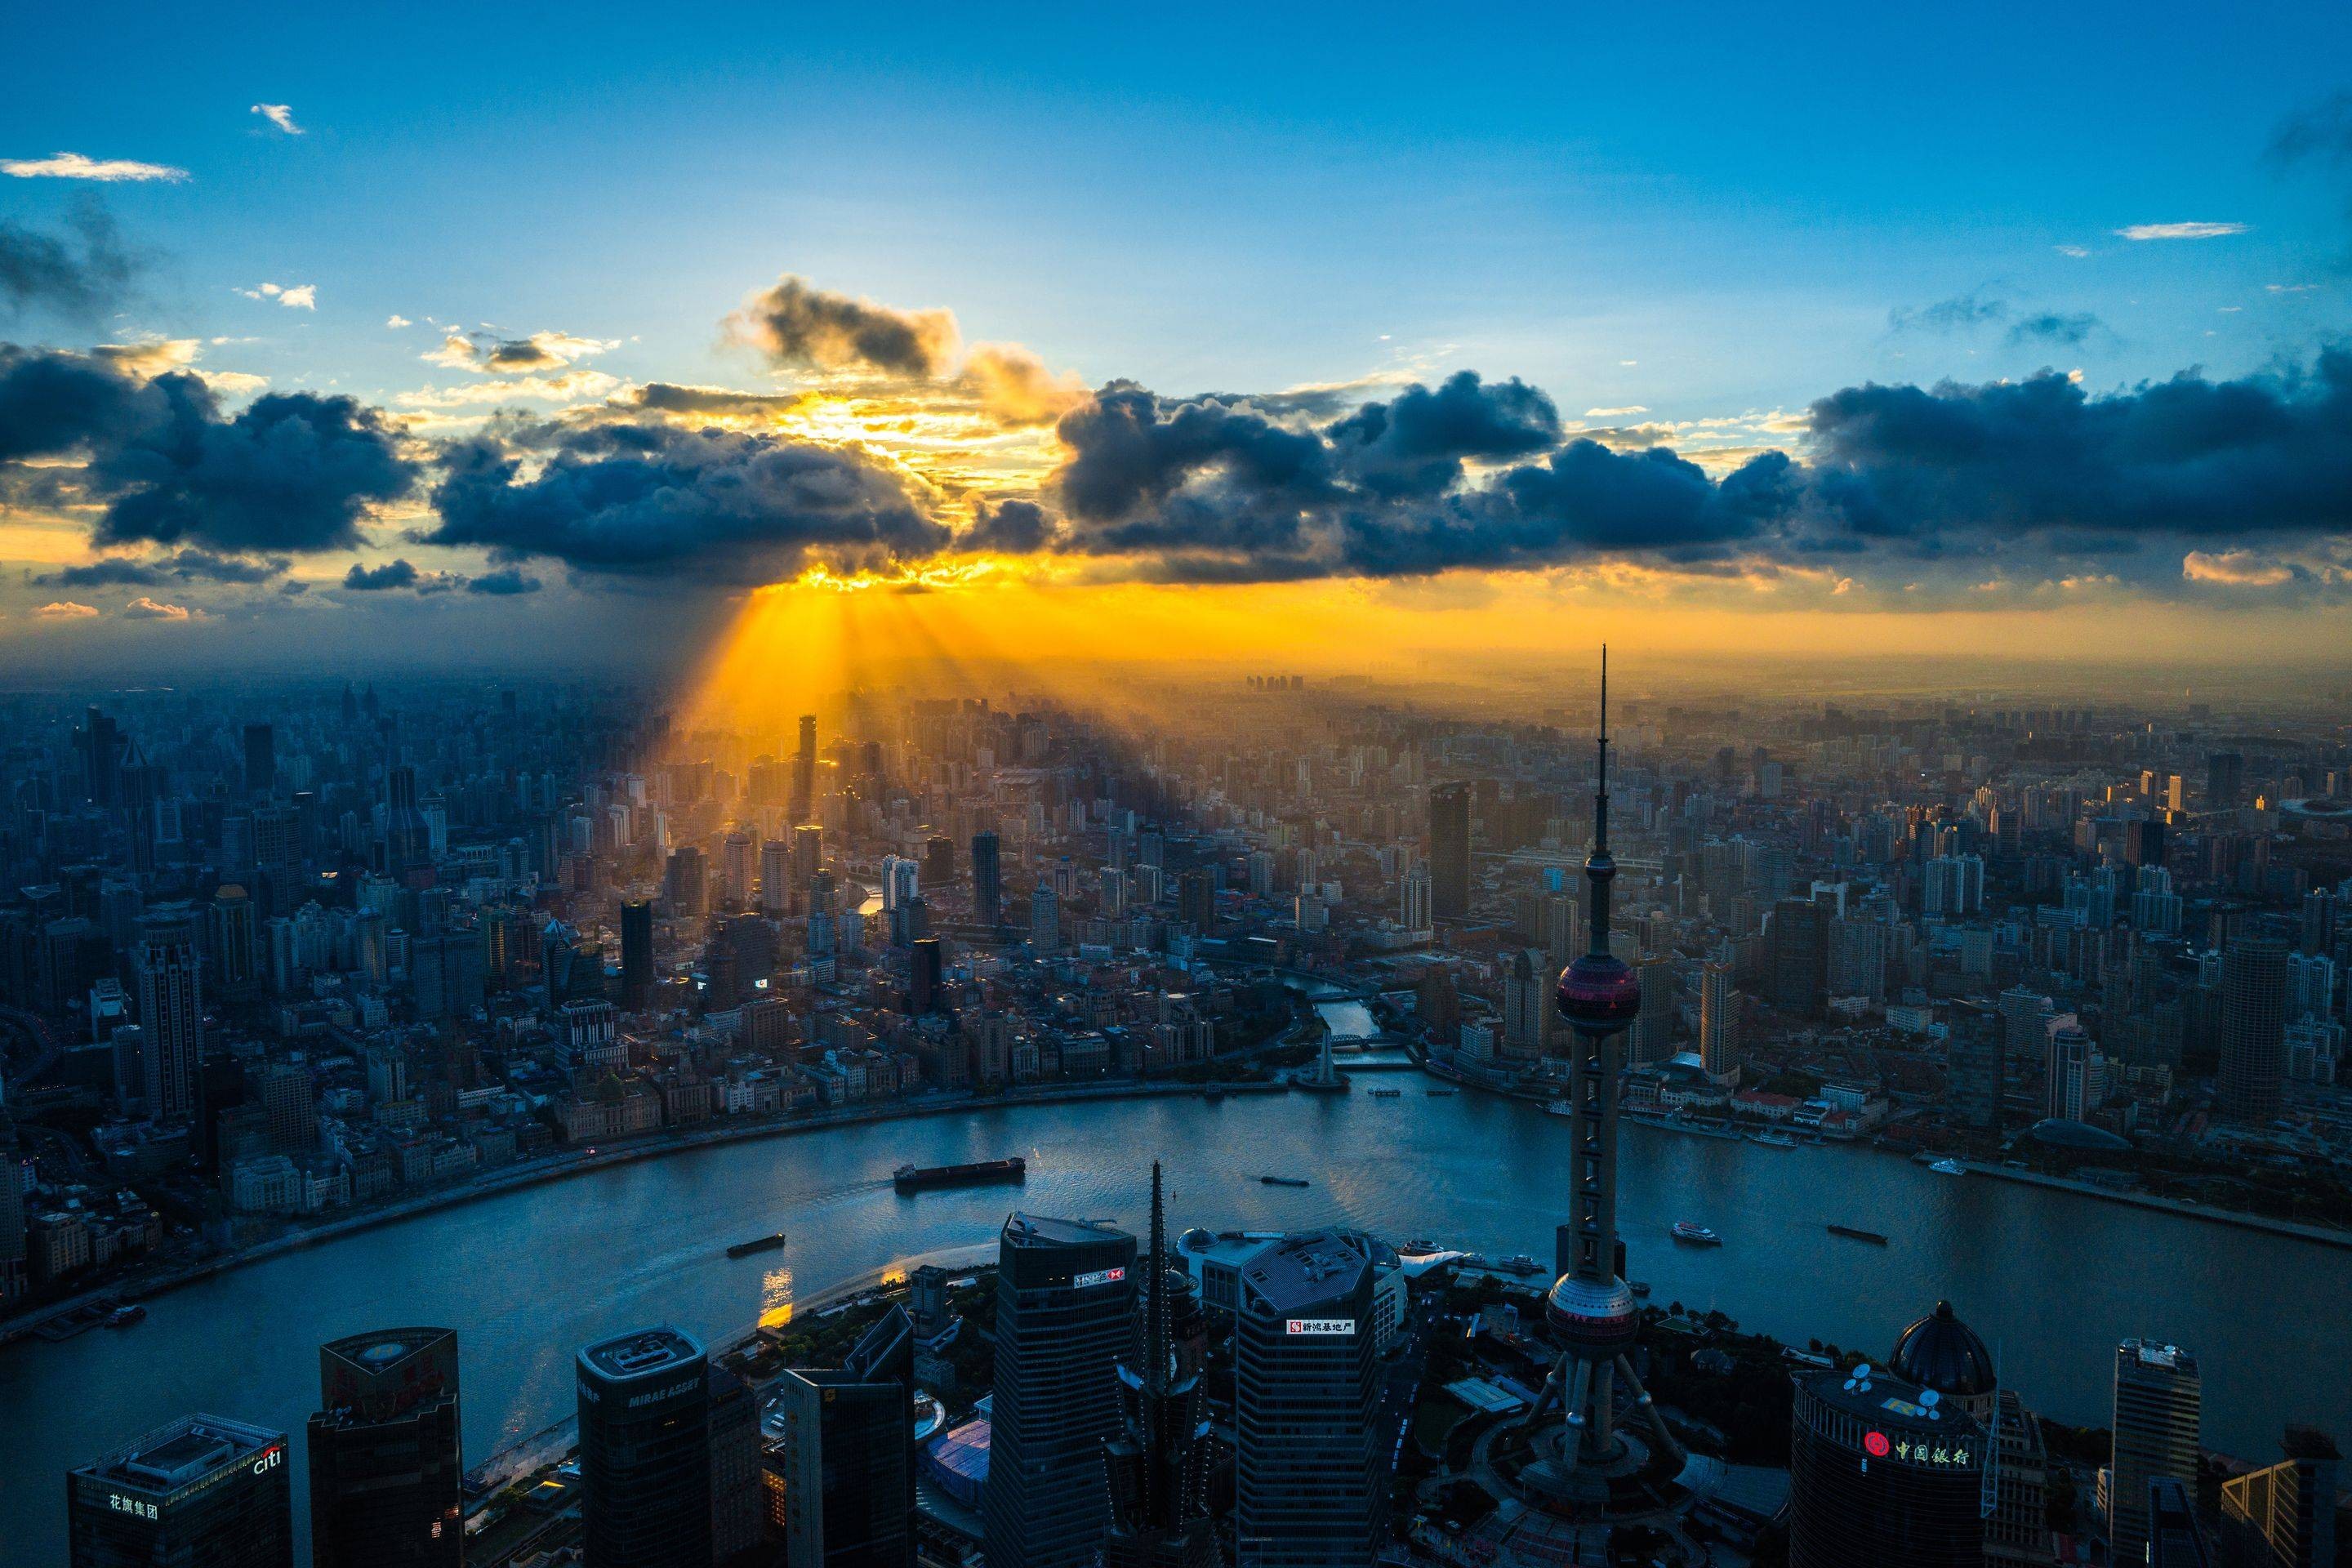 General 2880x1920 China Shanghai sunlight cityscape Asia sky clouds aerial view